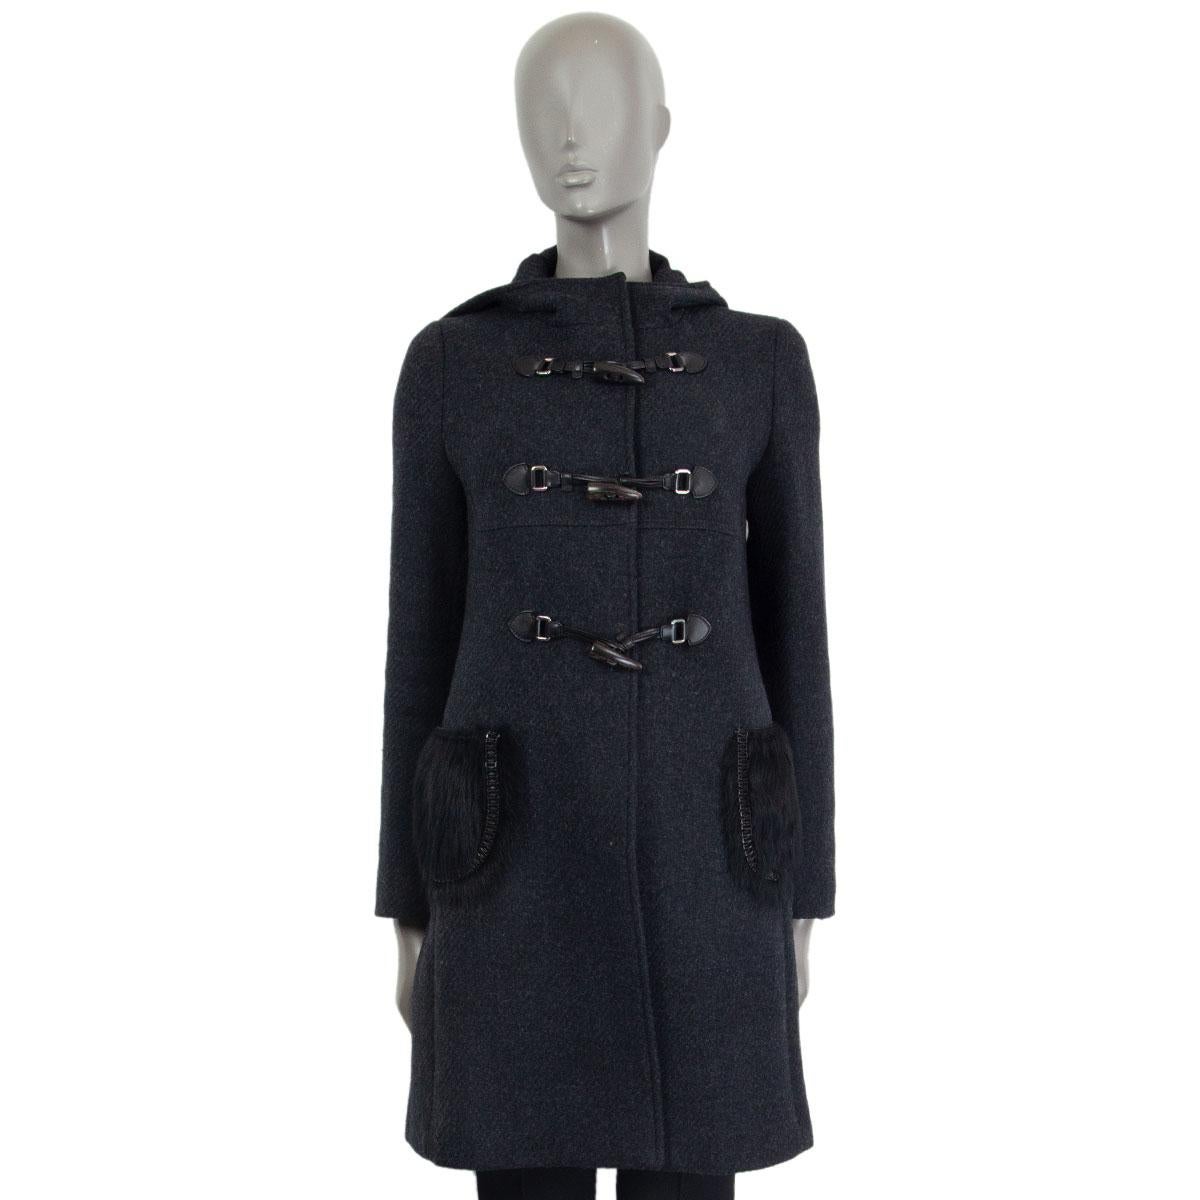 Prada duffle coat in dark grey virgin wool (100%) with a hood and black sheep fur pockets with braided metal trim details. Closes on the front with three wood horn shaped toggles and snap buttons. Lined in viscose (assumed as content is missing from